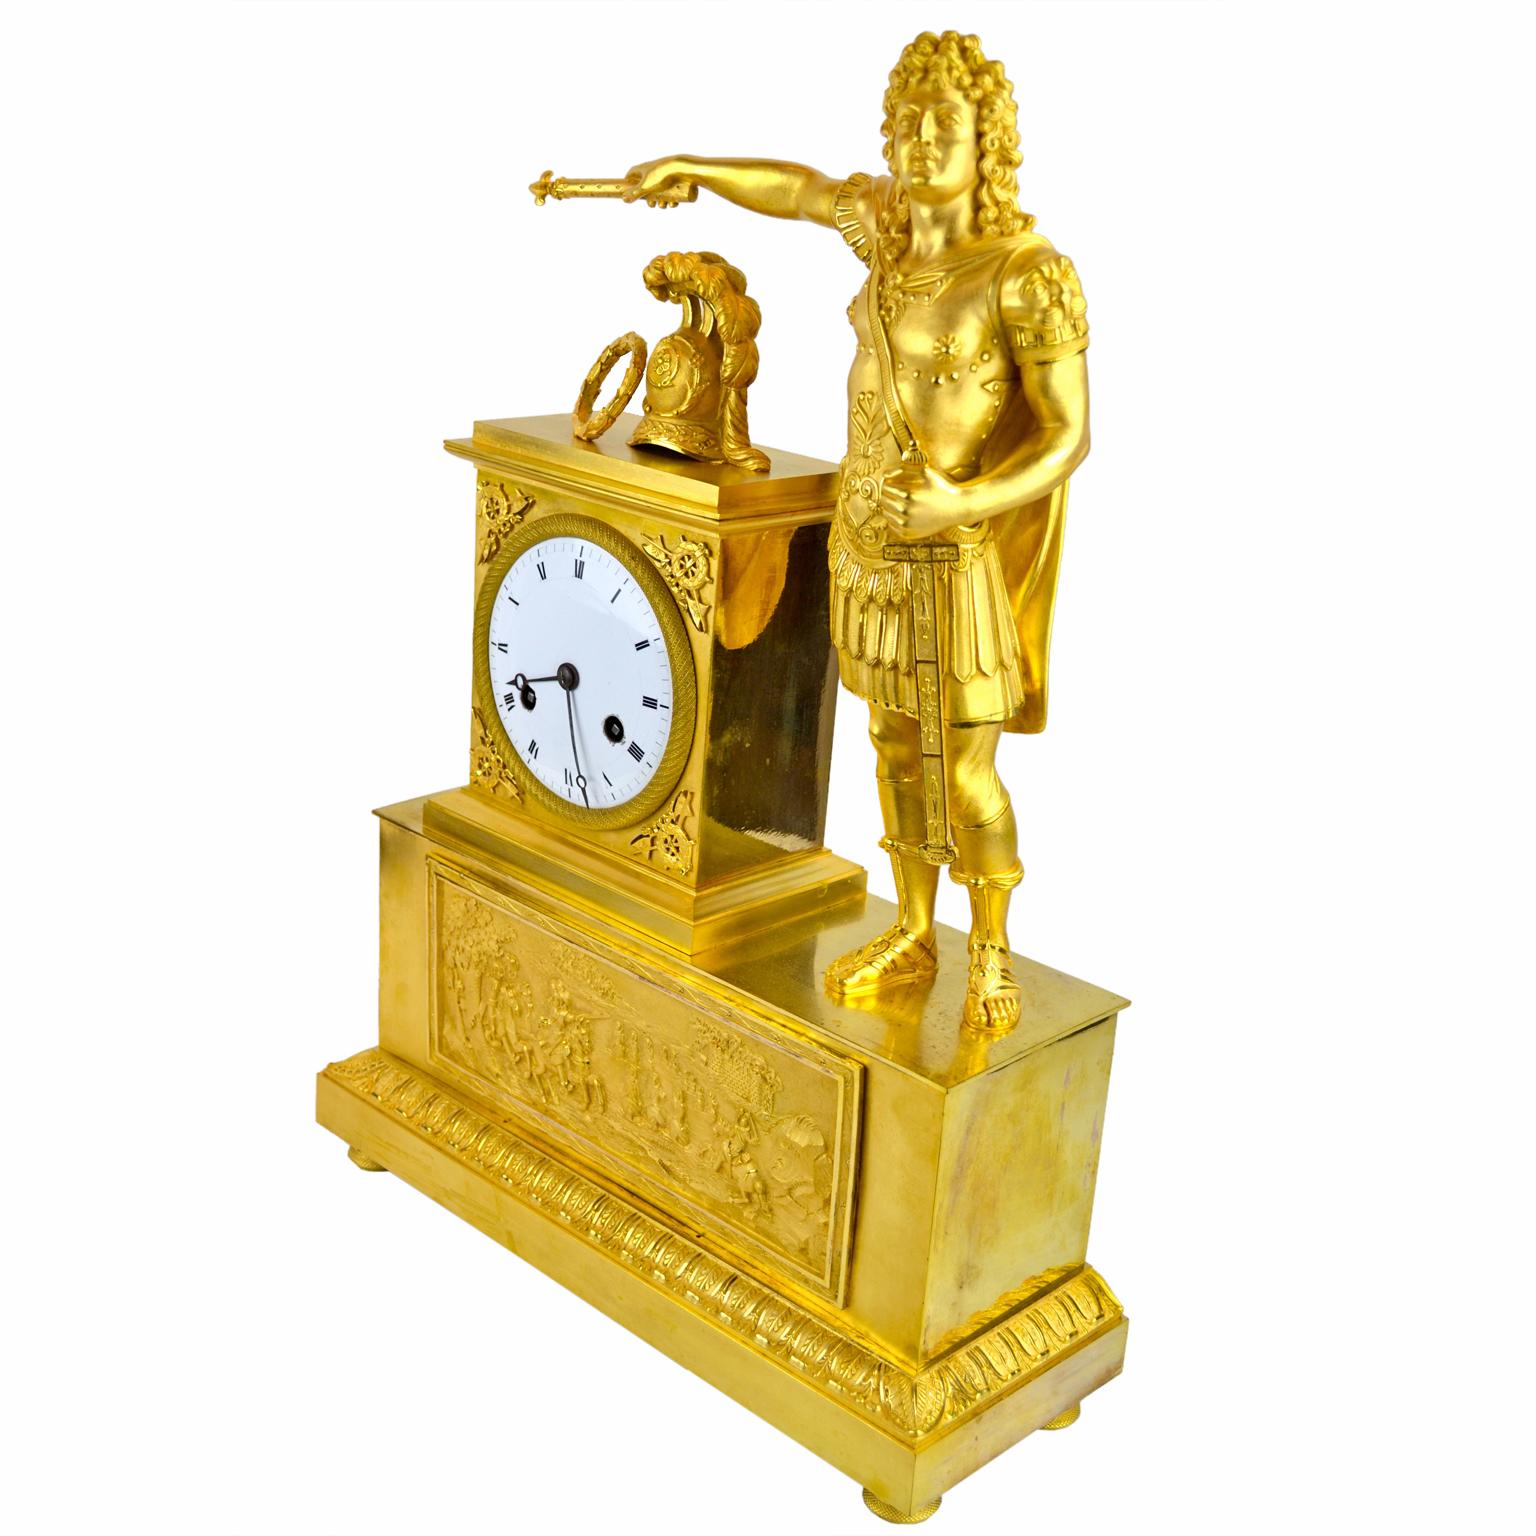 French Empire clock showing Louis XVI dressed as Caesar In Good Condition For Sale In Vancouver, British Columbia